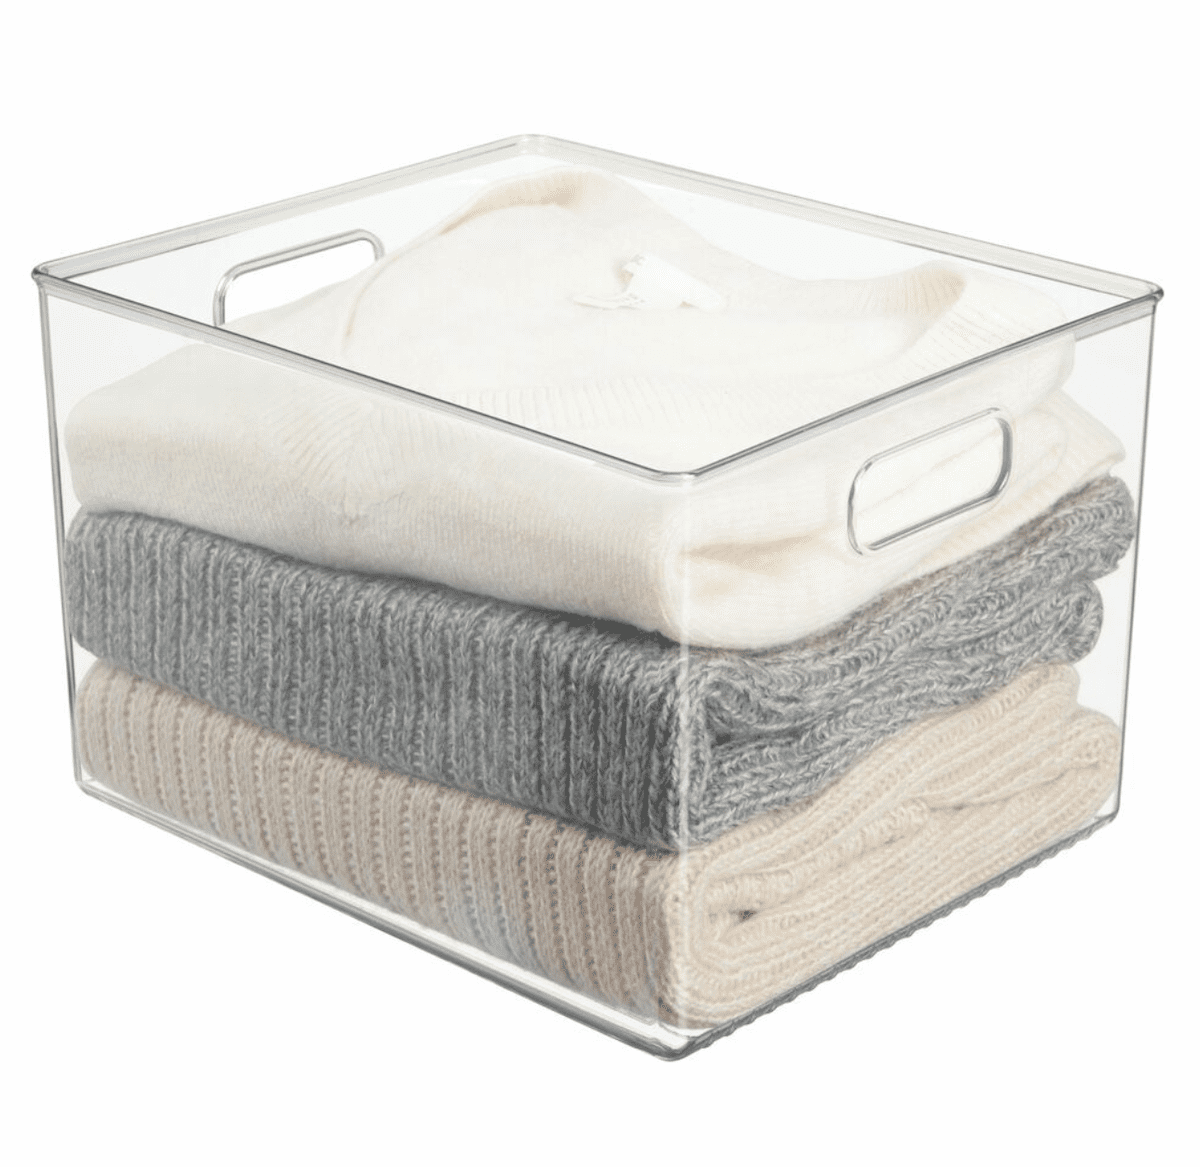 mDesign Plastic Stacking Closet Storage Organizer Bin with Drawer, 2 Pack,  Clear